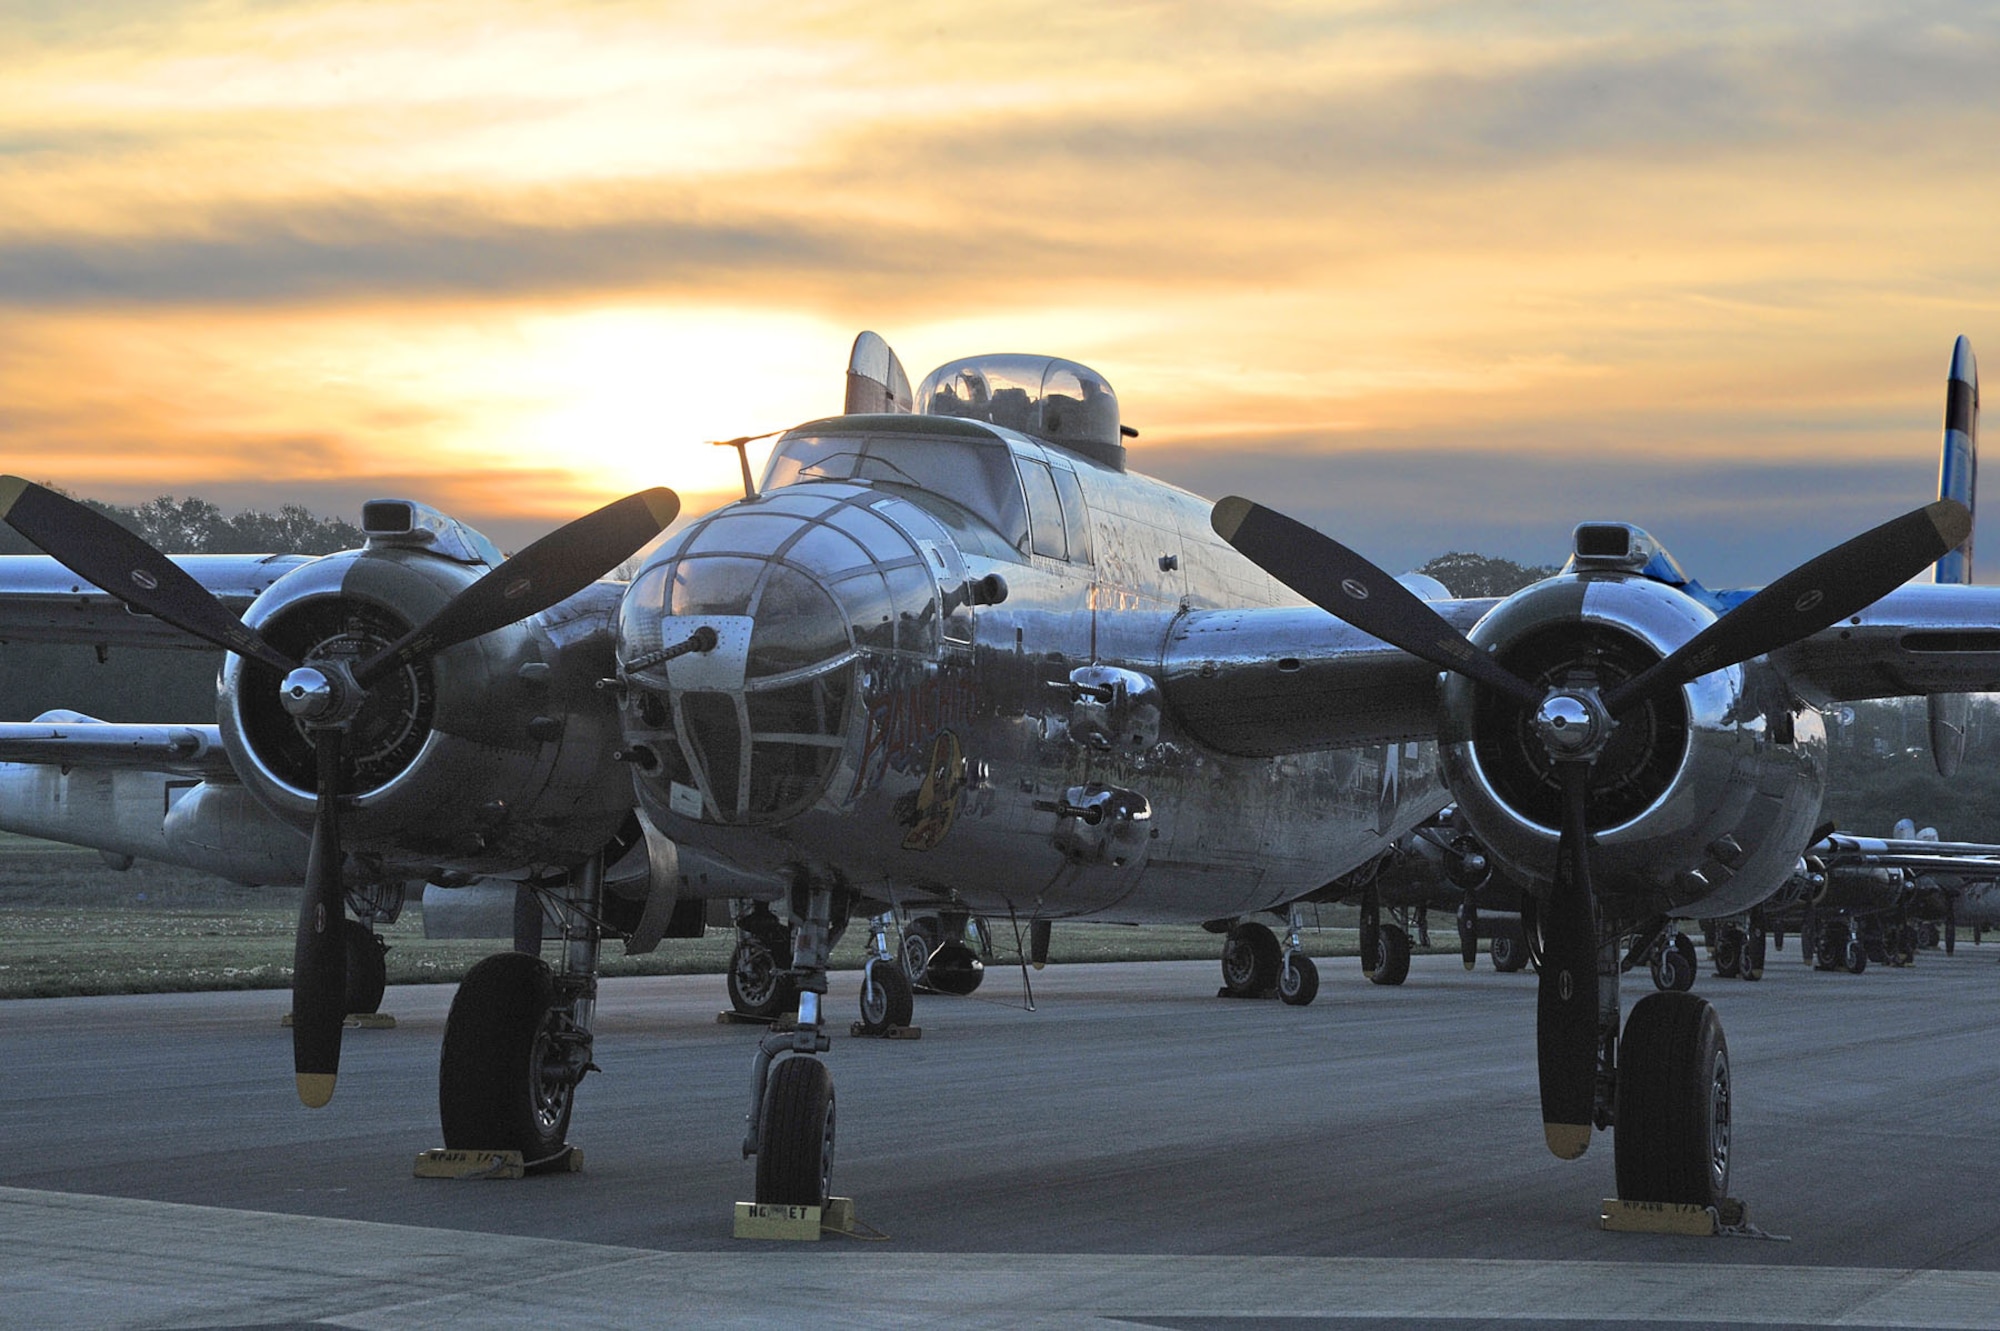 DAYTON, Ohio (04/2012) -- Twenty B-25 bombers landed at the National Museum of the U.S. Air Force on April 17, 2012, as part of the Doolittle Raiders 70th Anniversary Reunion. (U.S. Air Force photo by Ben Strasser)